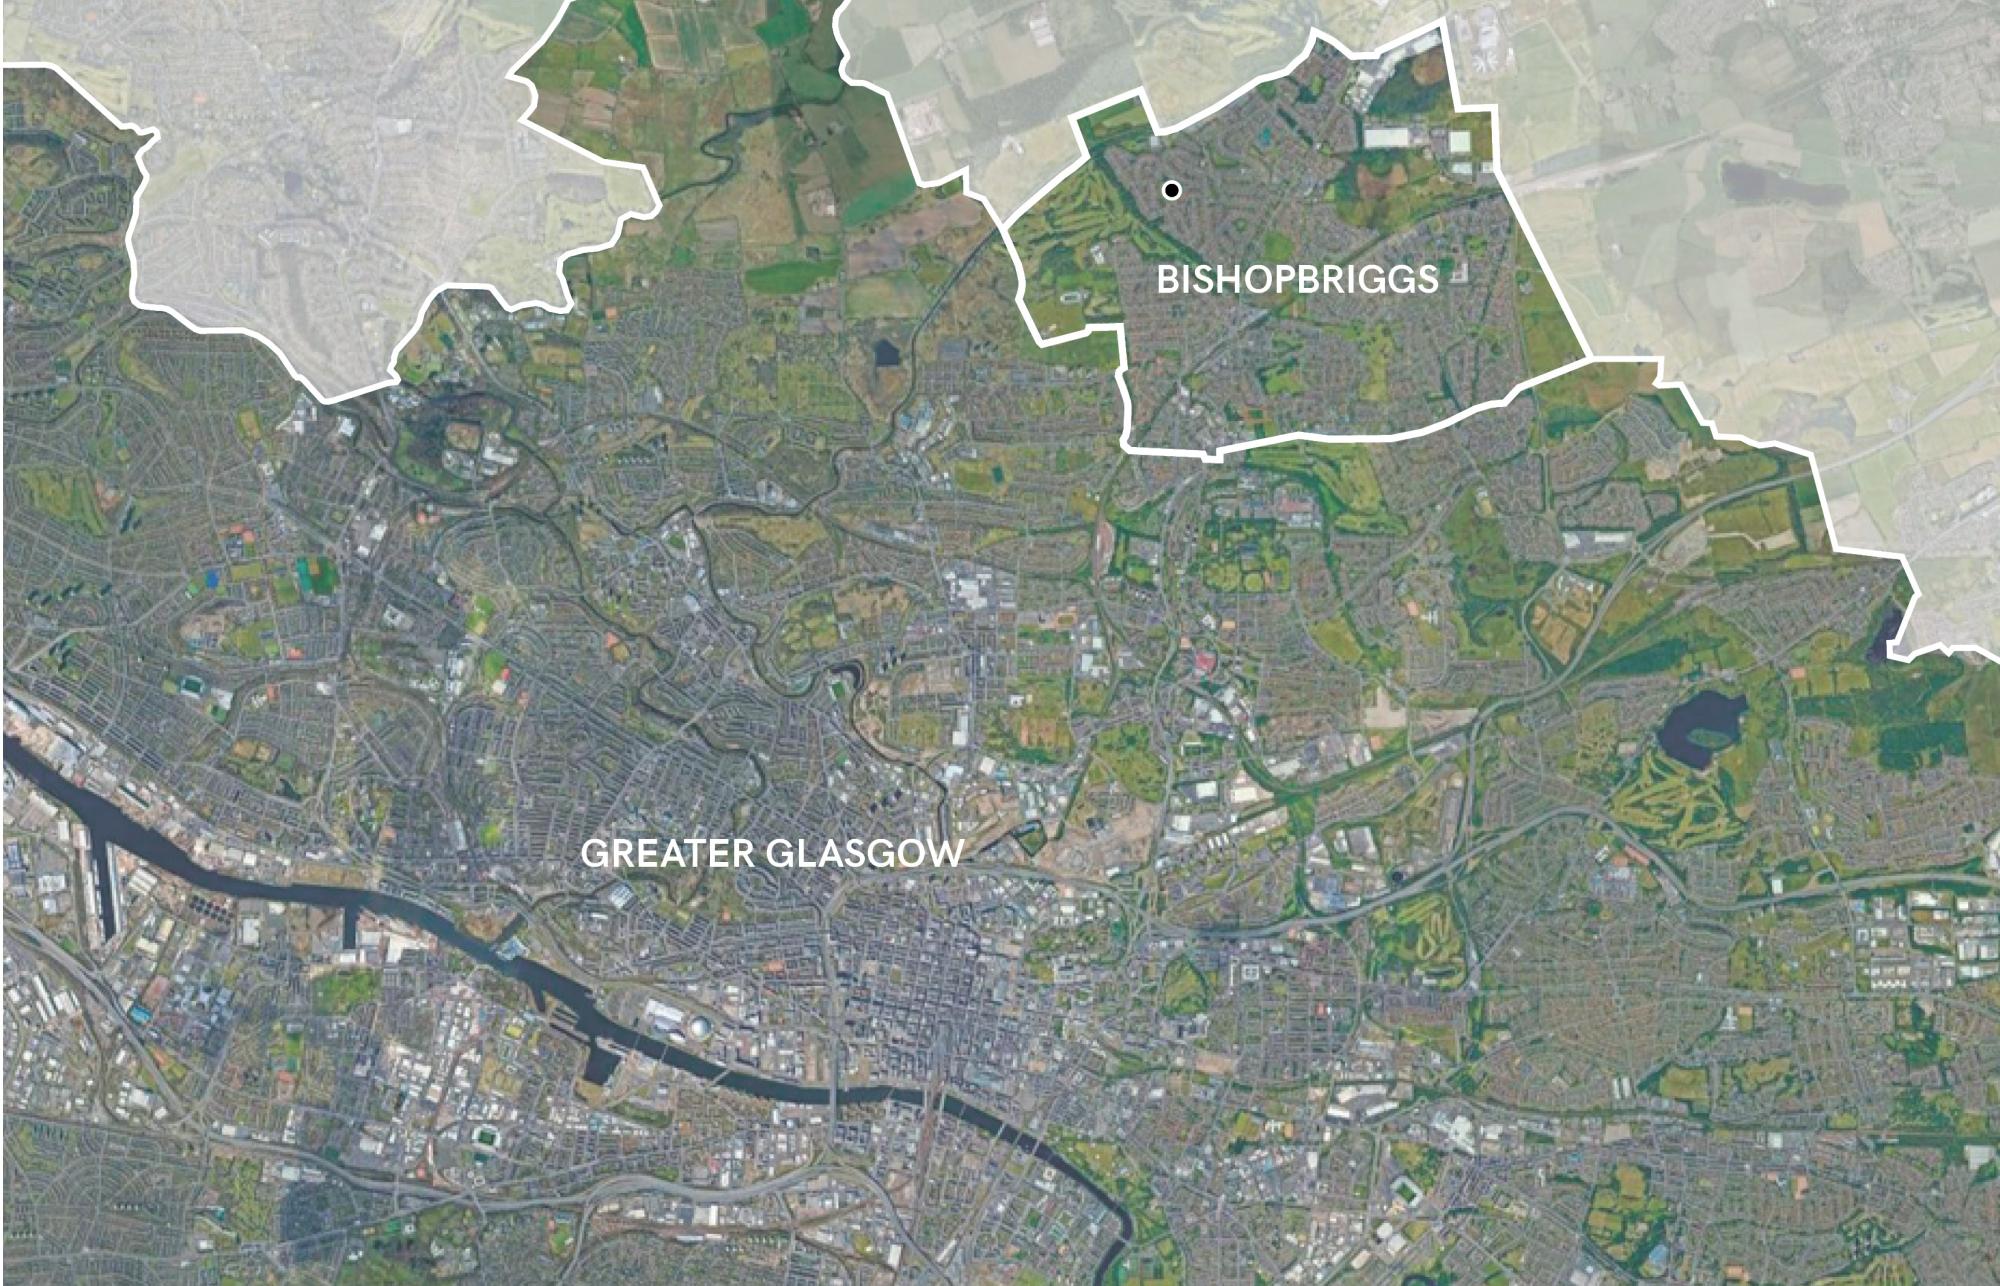 Arial view of Bishopbriggs and Greater Glasgow